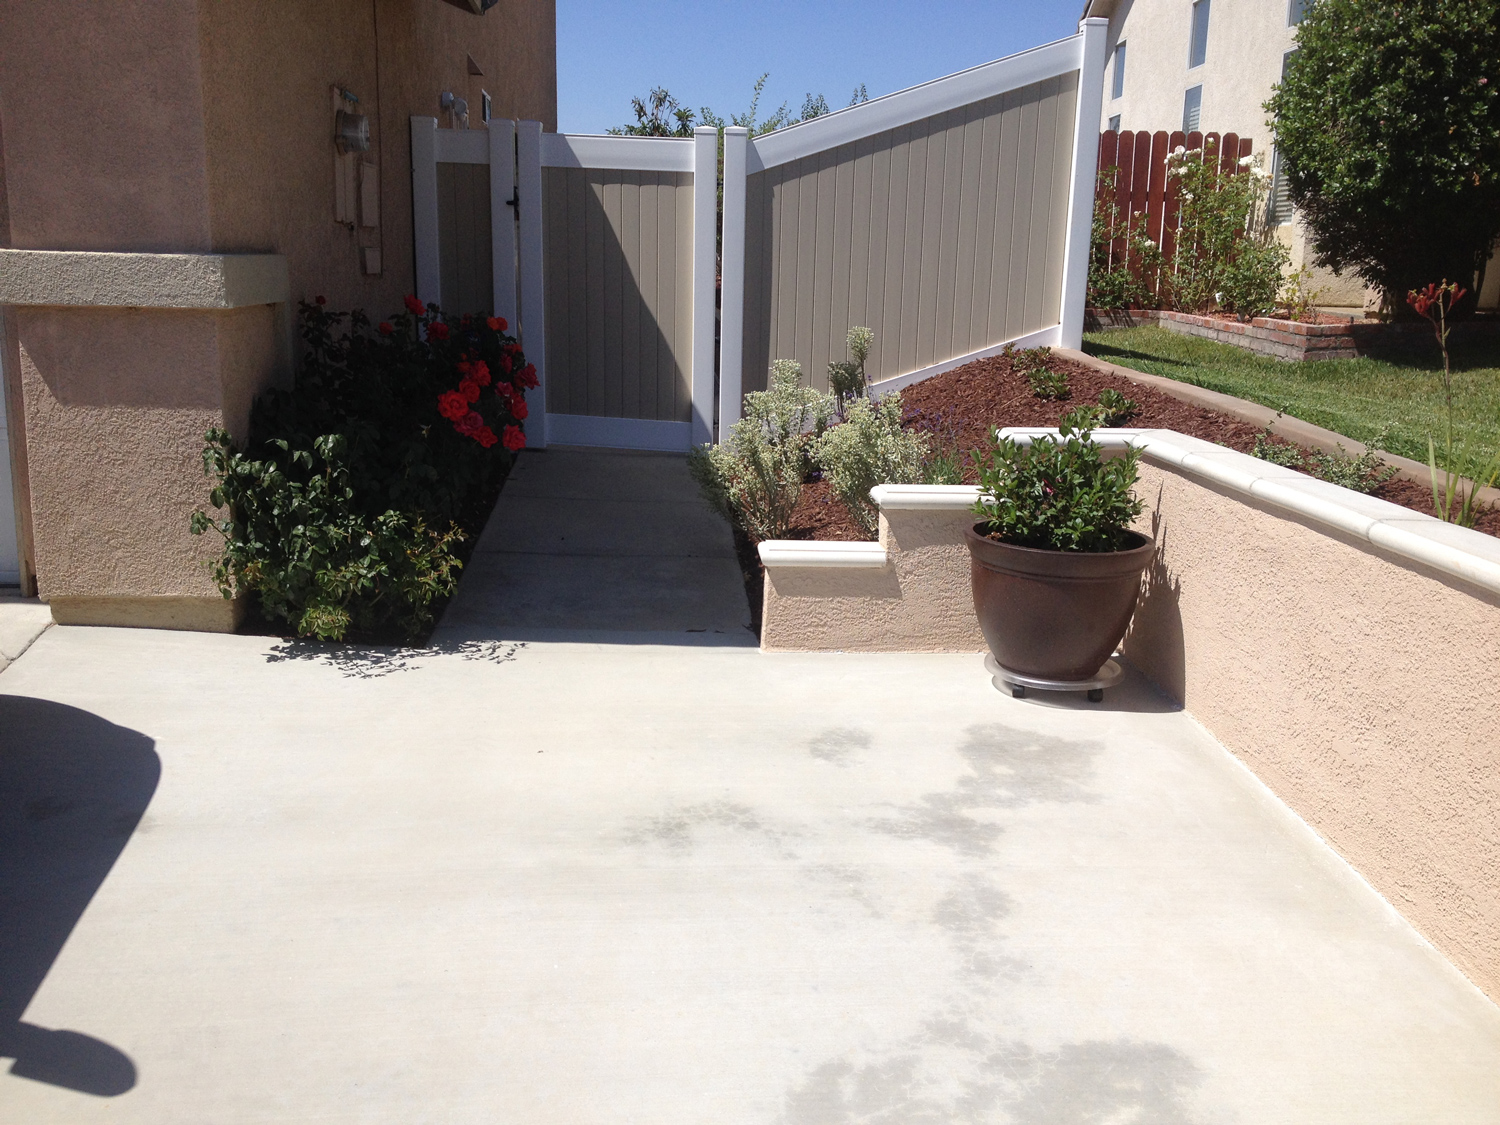 Driveway extension with retaining wall in Temecula McCabe's Landscape Construction